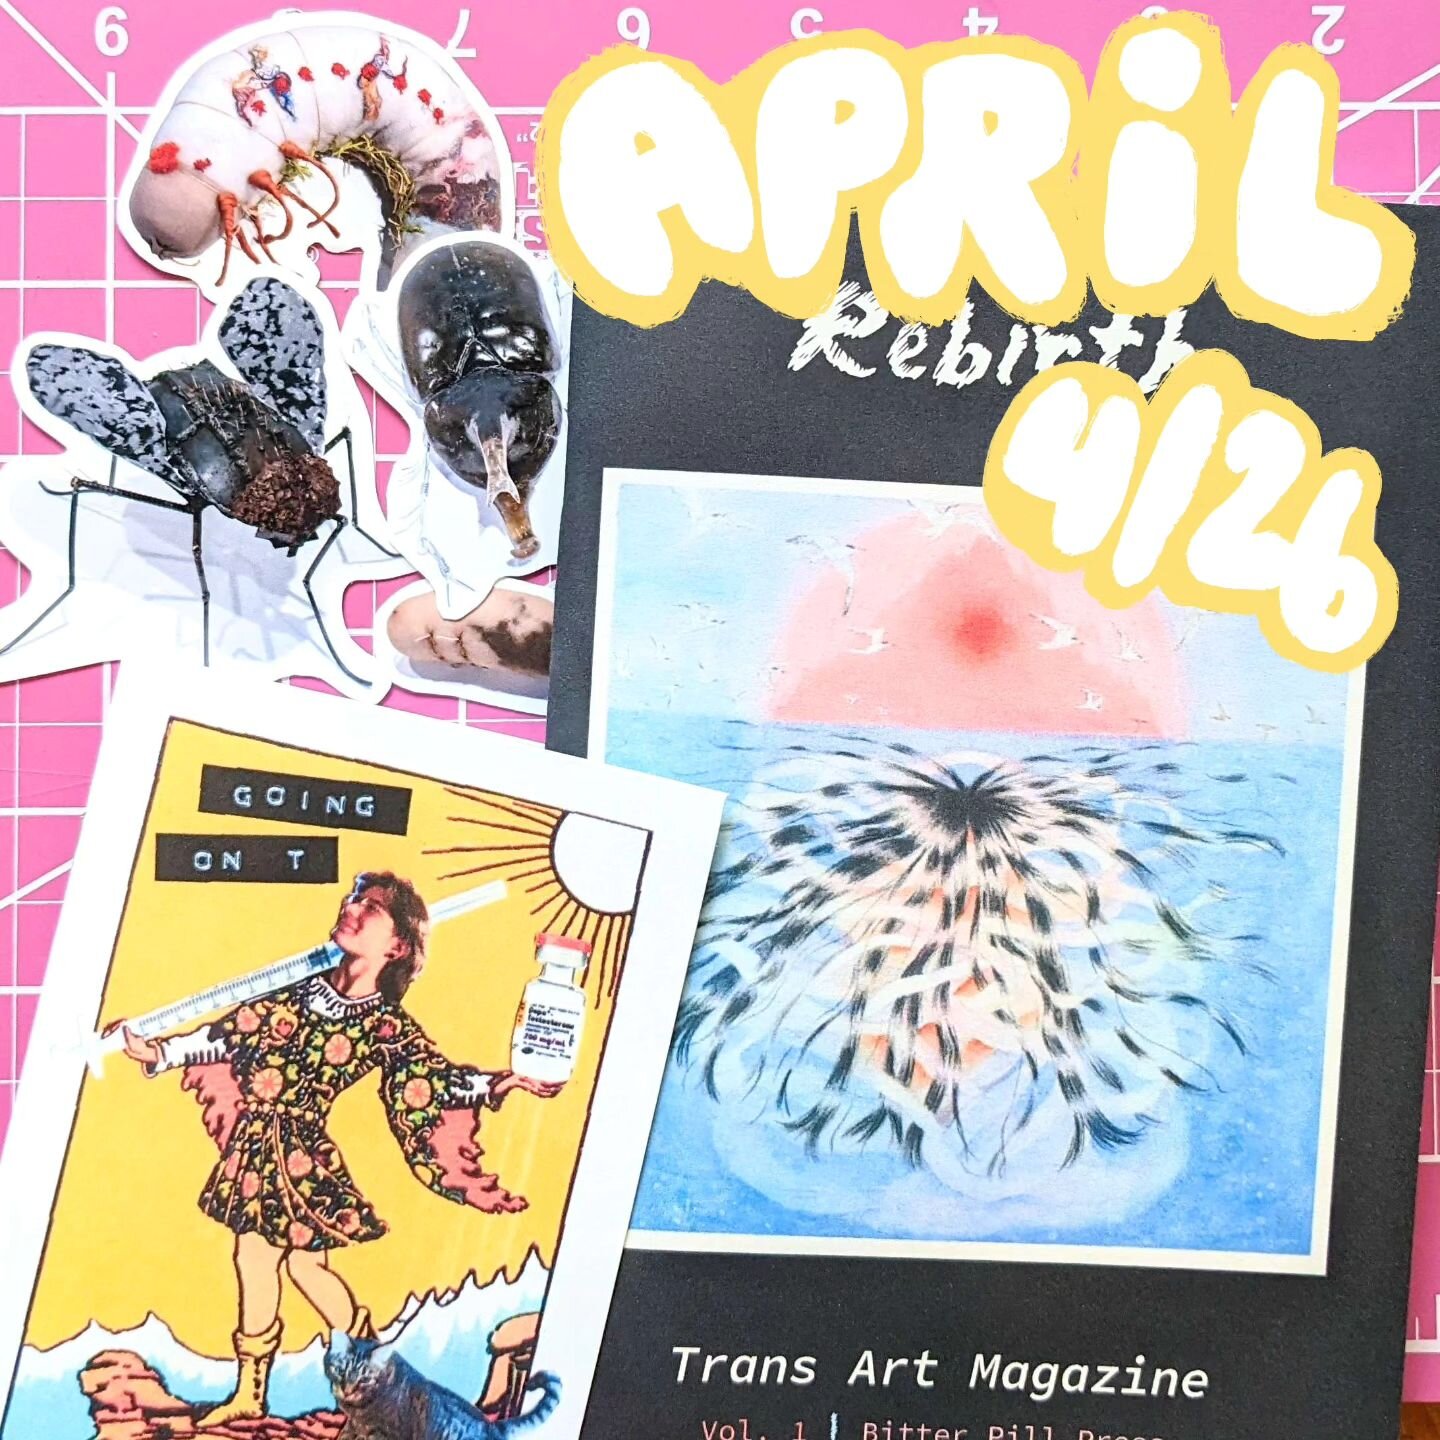 Almost time to send out April mail to supporters! 📬 

💌 &quot;Trans Art Magazine vol. 1: Rebirth,&quot; plus my latest personal zine about my experiences on T. It'll also include the sticker club stickers

🪰 This month's sticker club includes 4 st